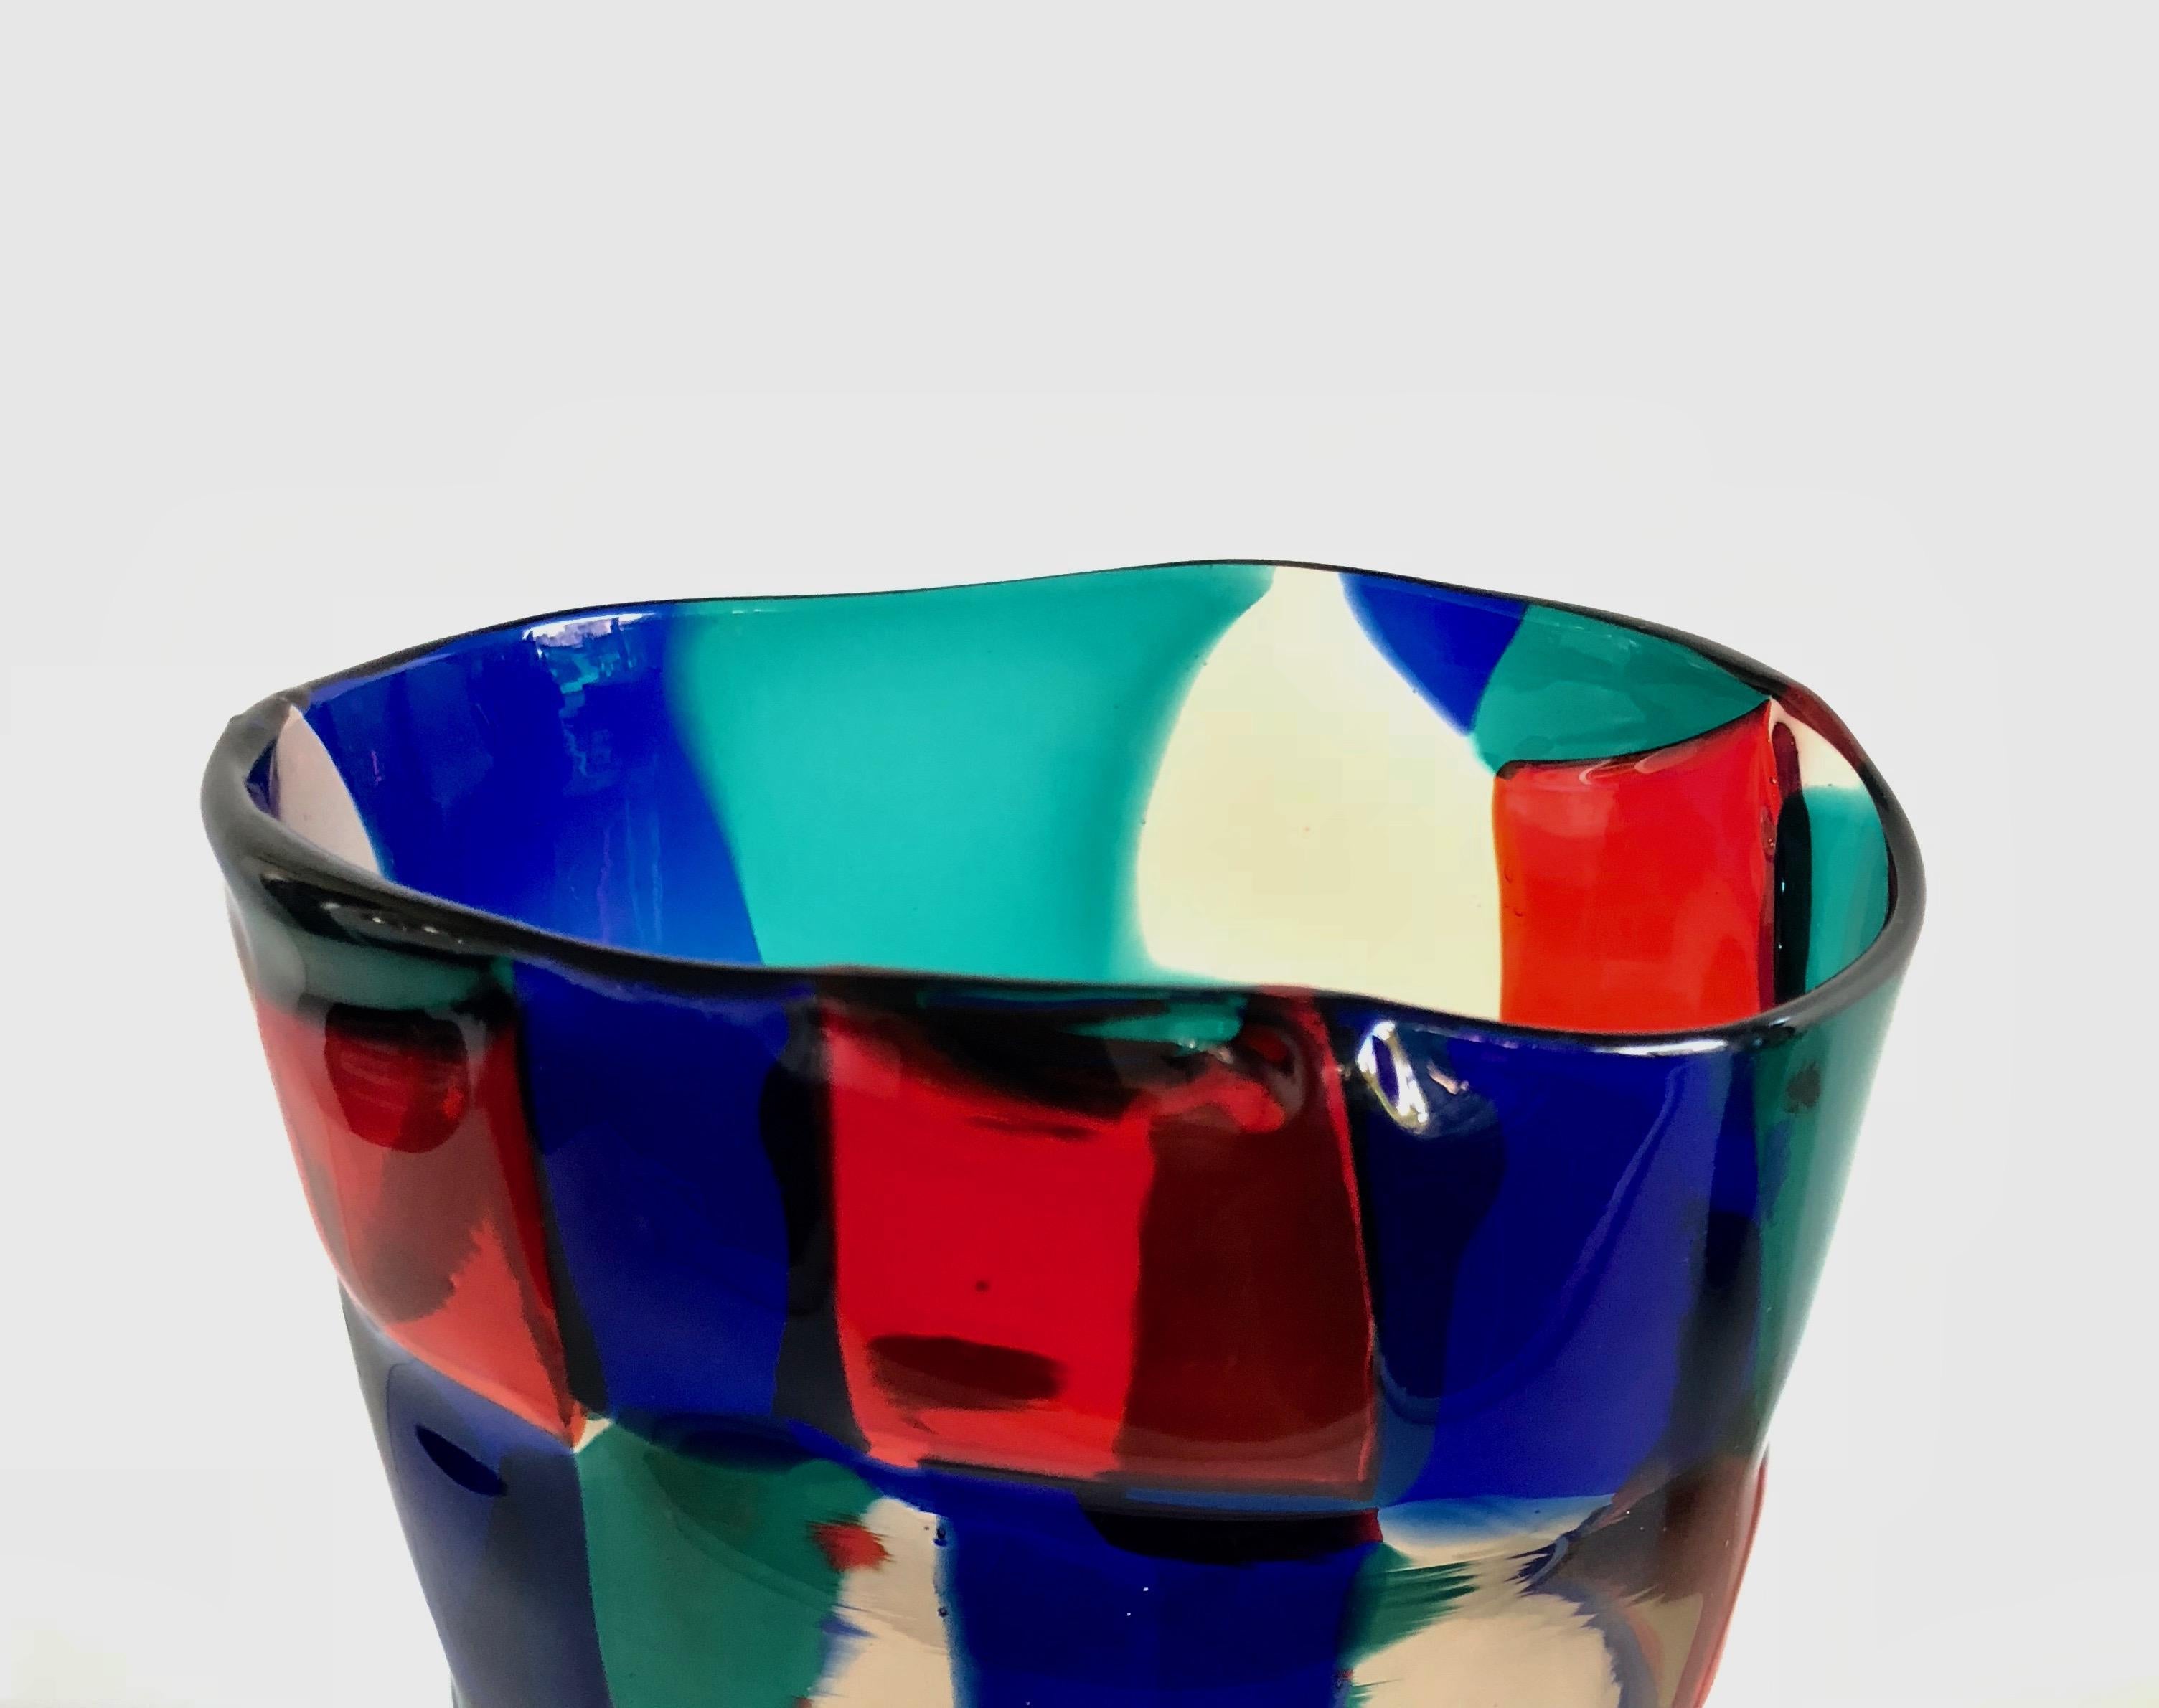 A vintage Venini vase designed by Fulvio Bianconi for Venini.
Known as model 4910.
Transparent straw colored, red, sapphire and green patches of glass.
This piece which has a slightly flared body has an oval cross section.
Designed between